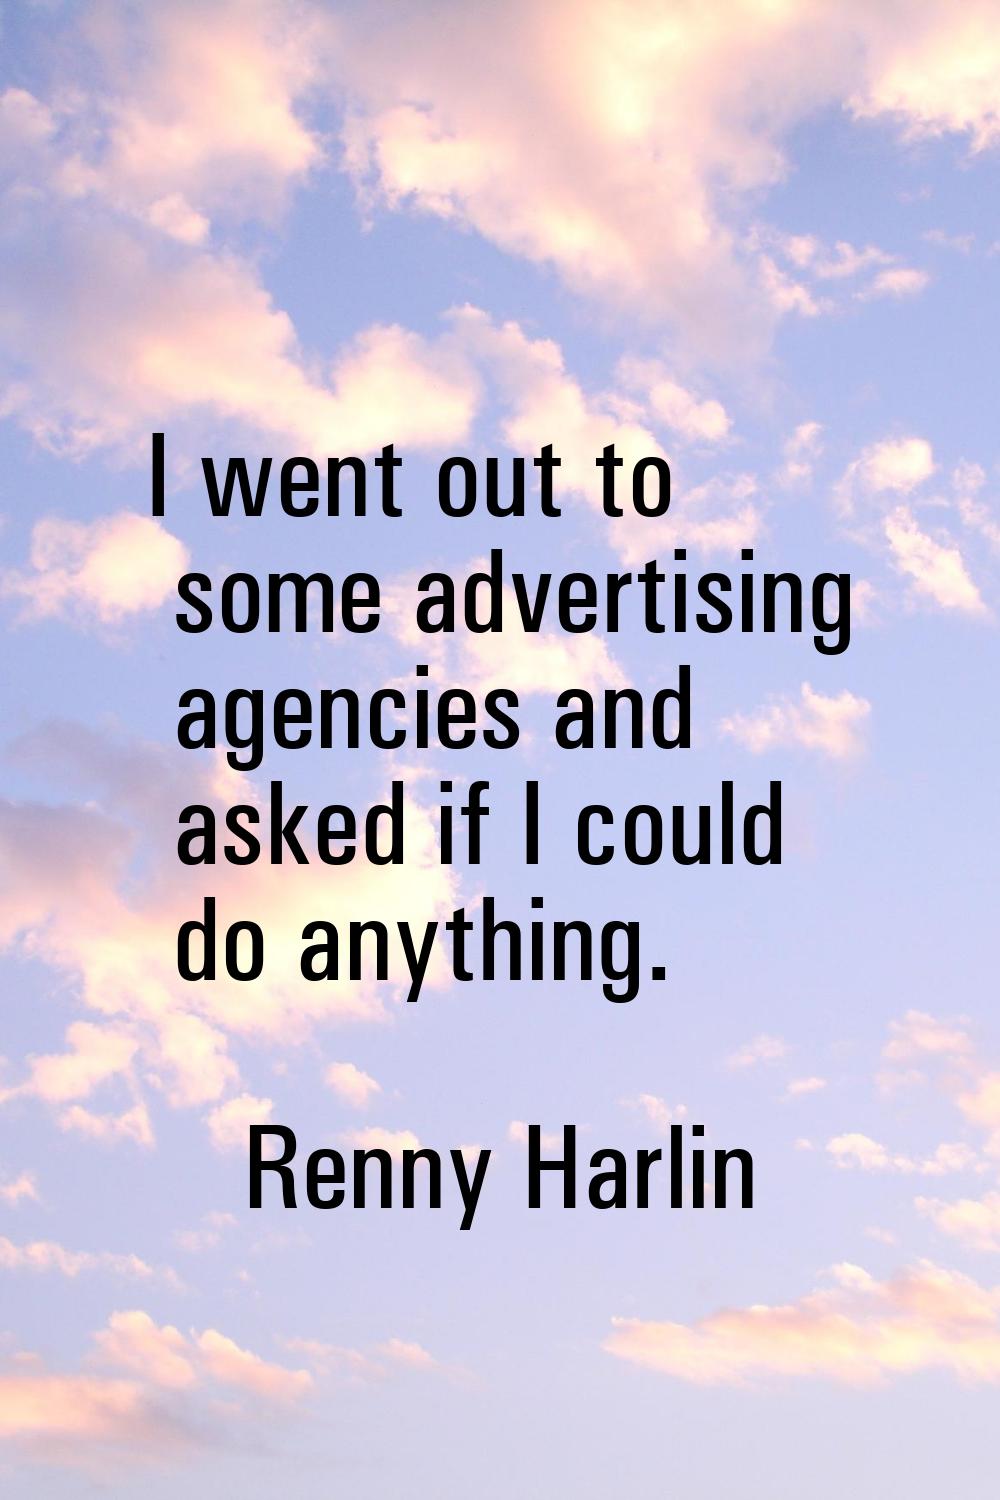 I went out to some advertising agencies and asked if I could do anything.